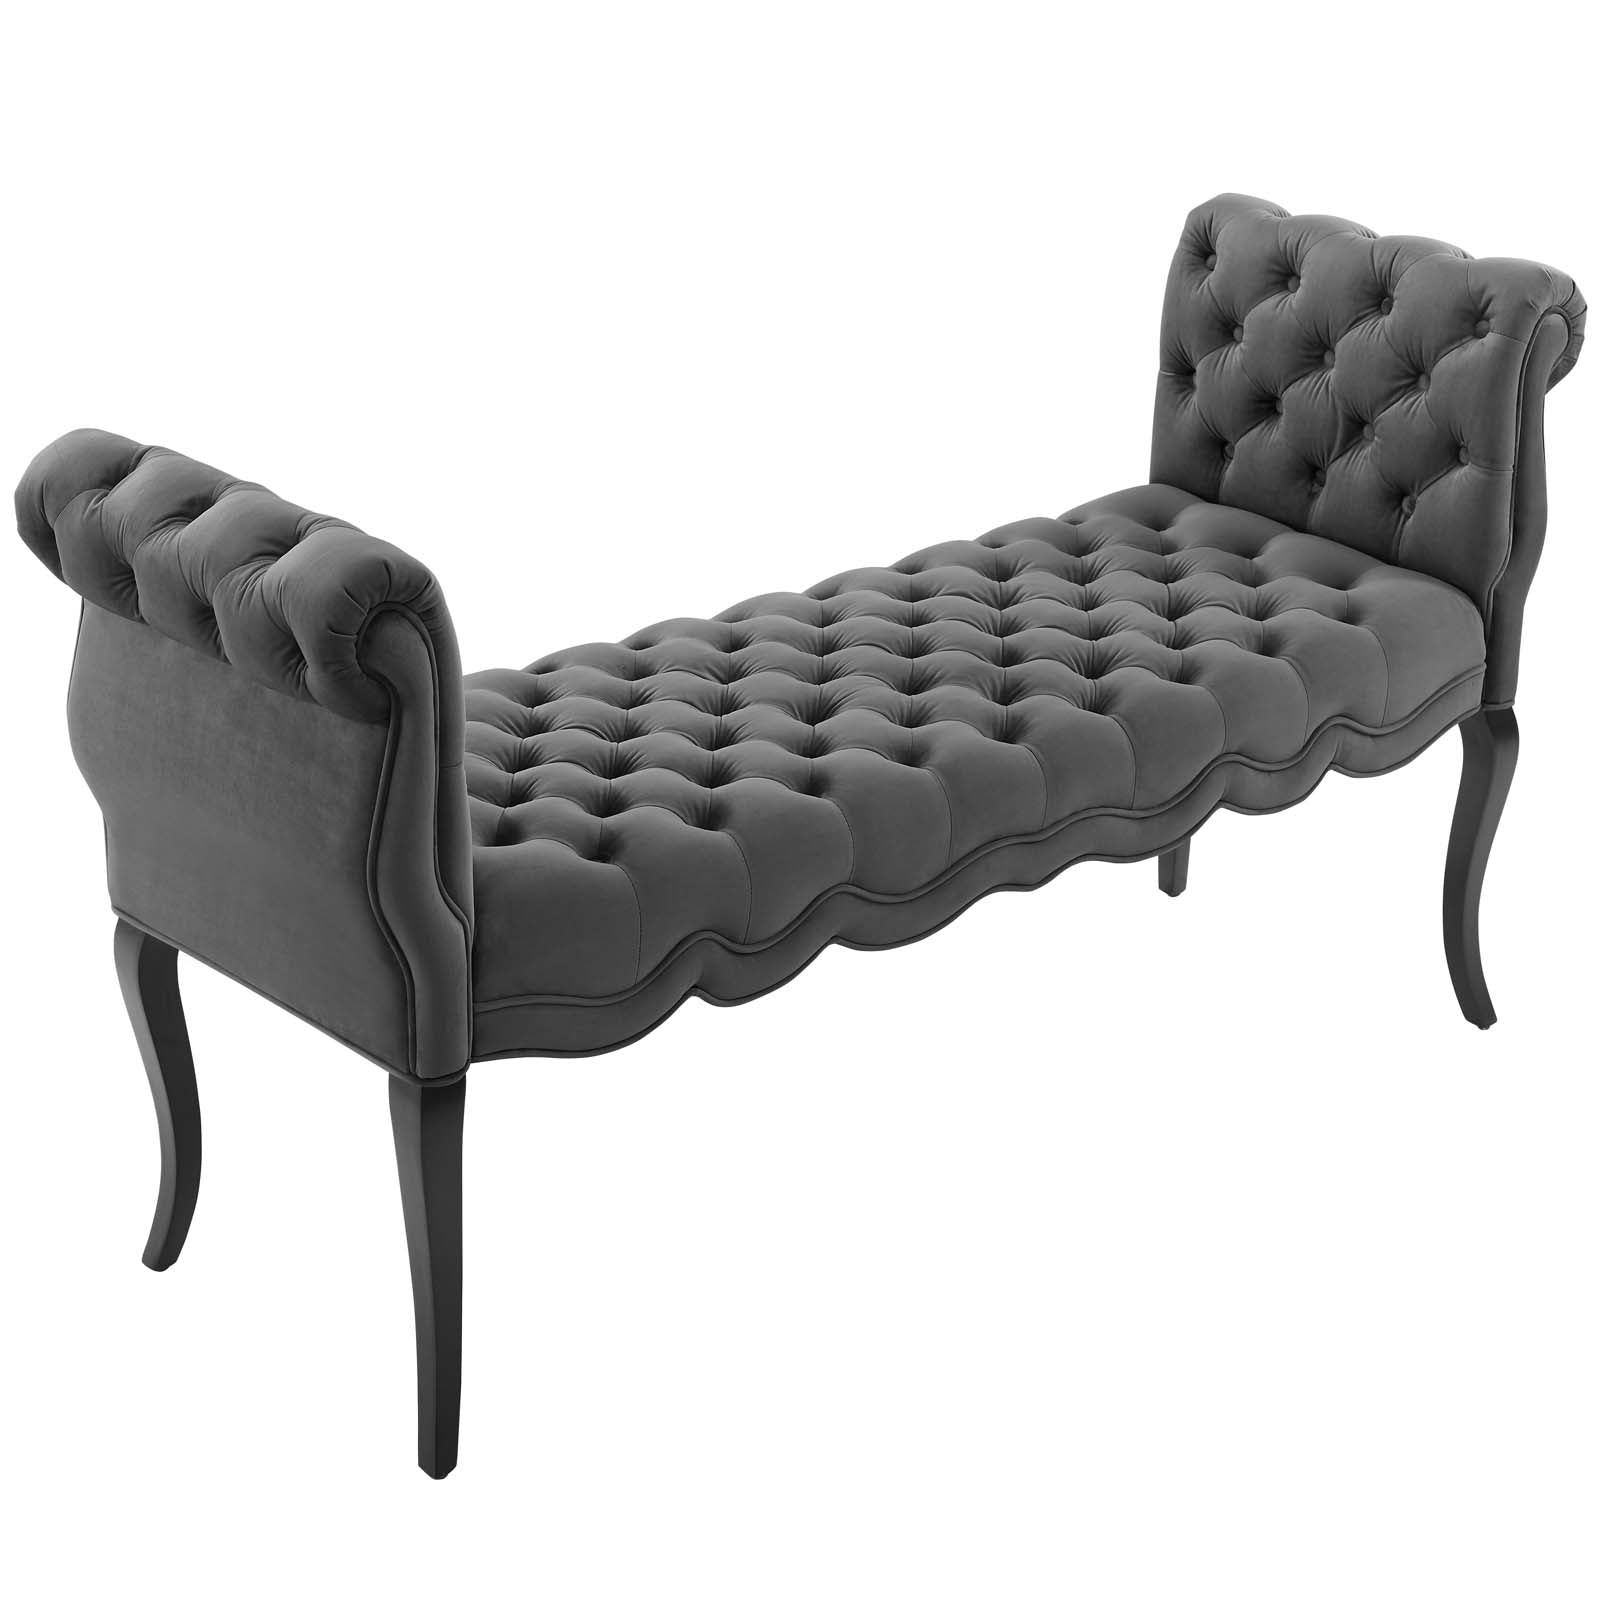 Modway Benches - Adelia Chesterfield Bench Gray